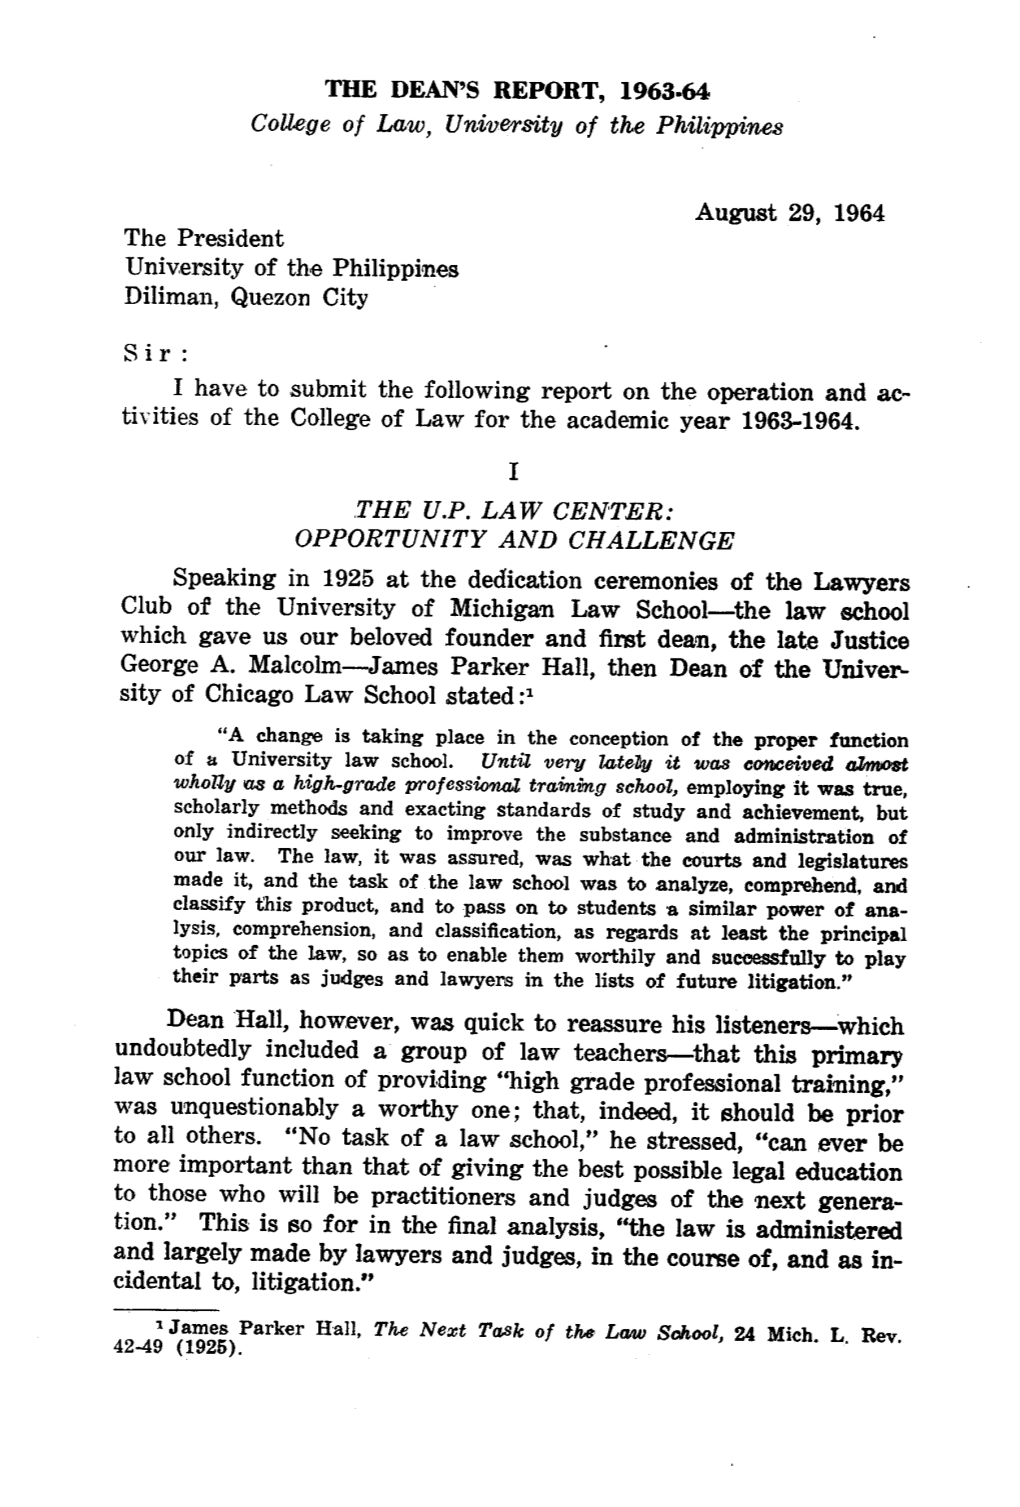 Couegeof Law, Univerbity of the Philippines the President Univ